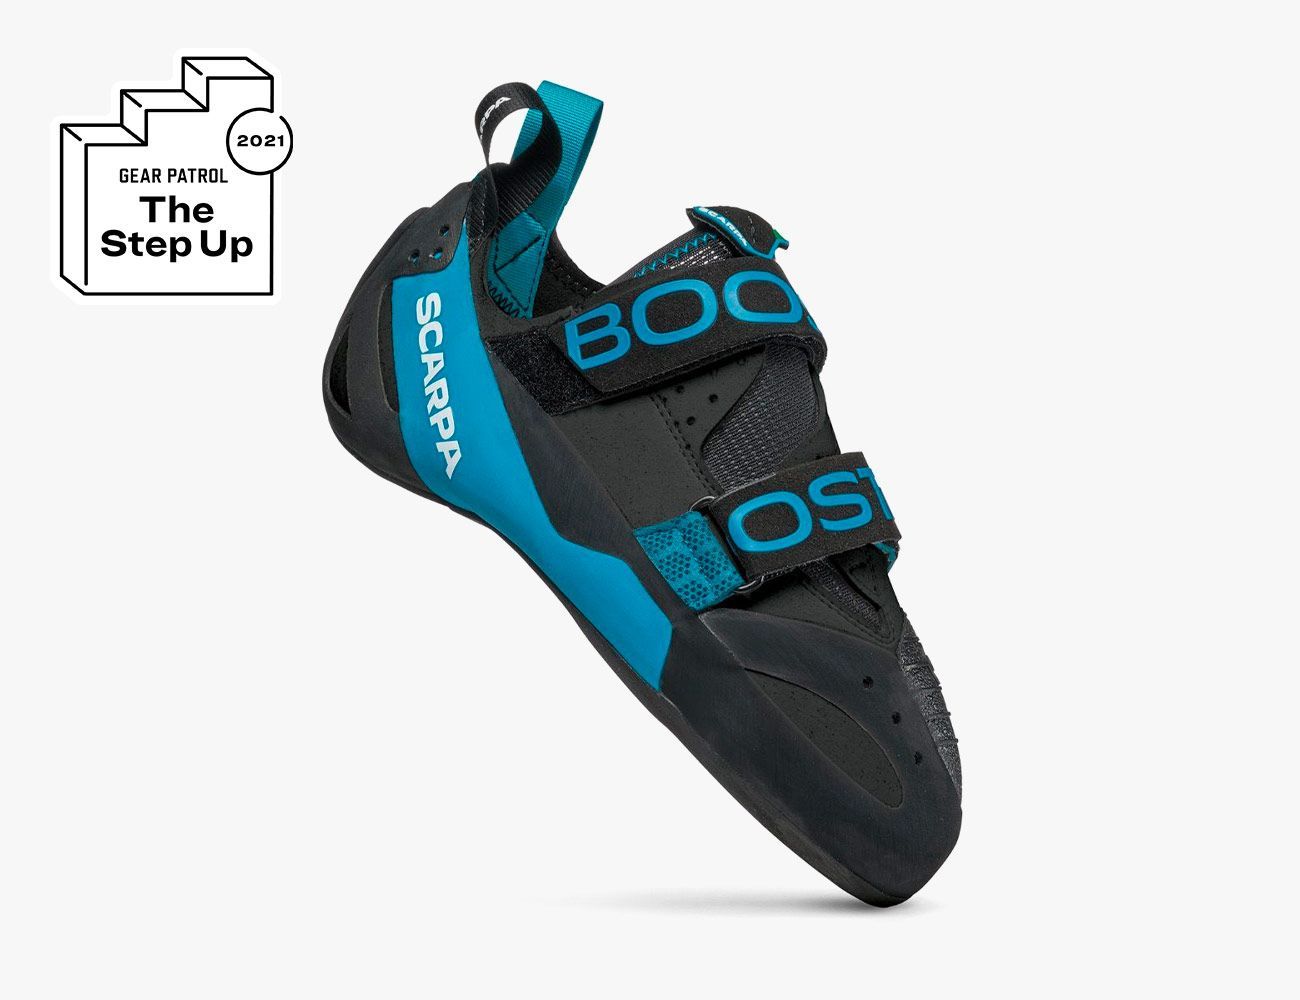 The Best Rock Climbing Shoes of 2021